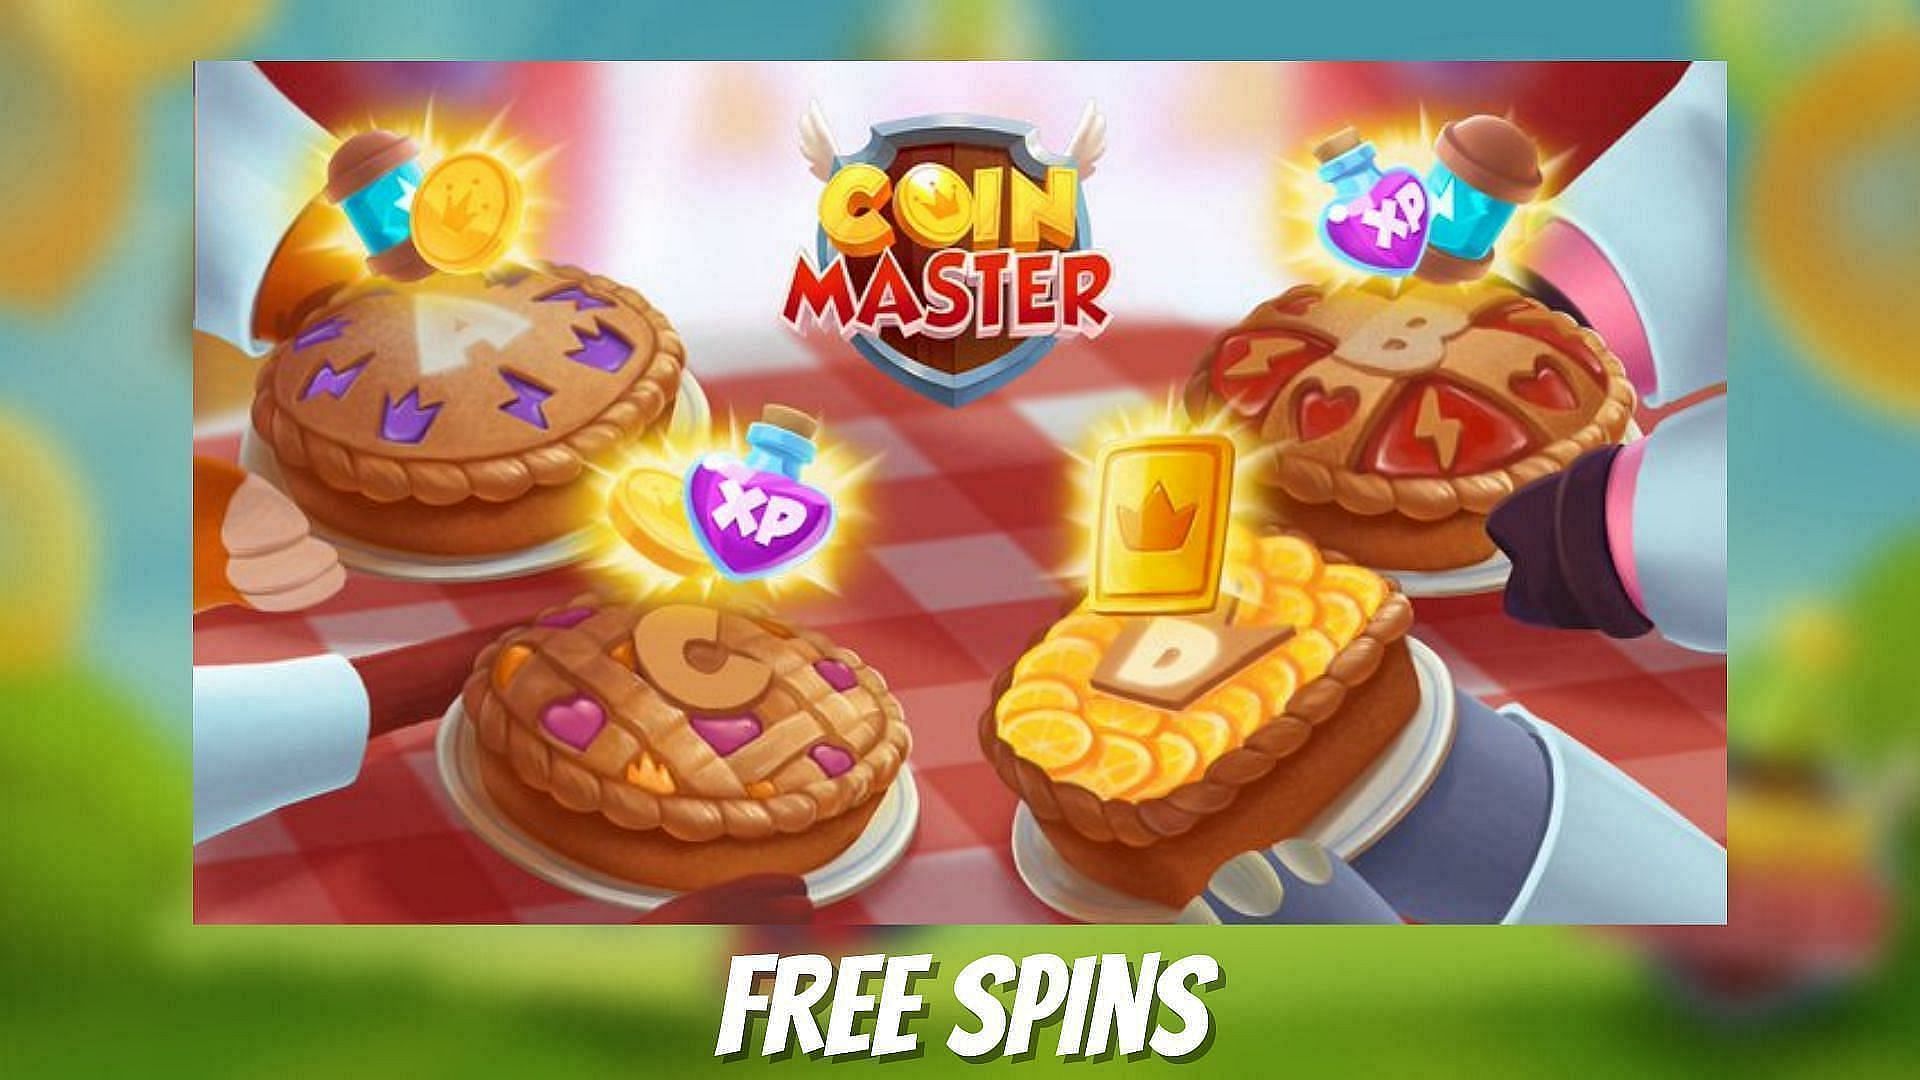 feb 23 2019 free coin master spins